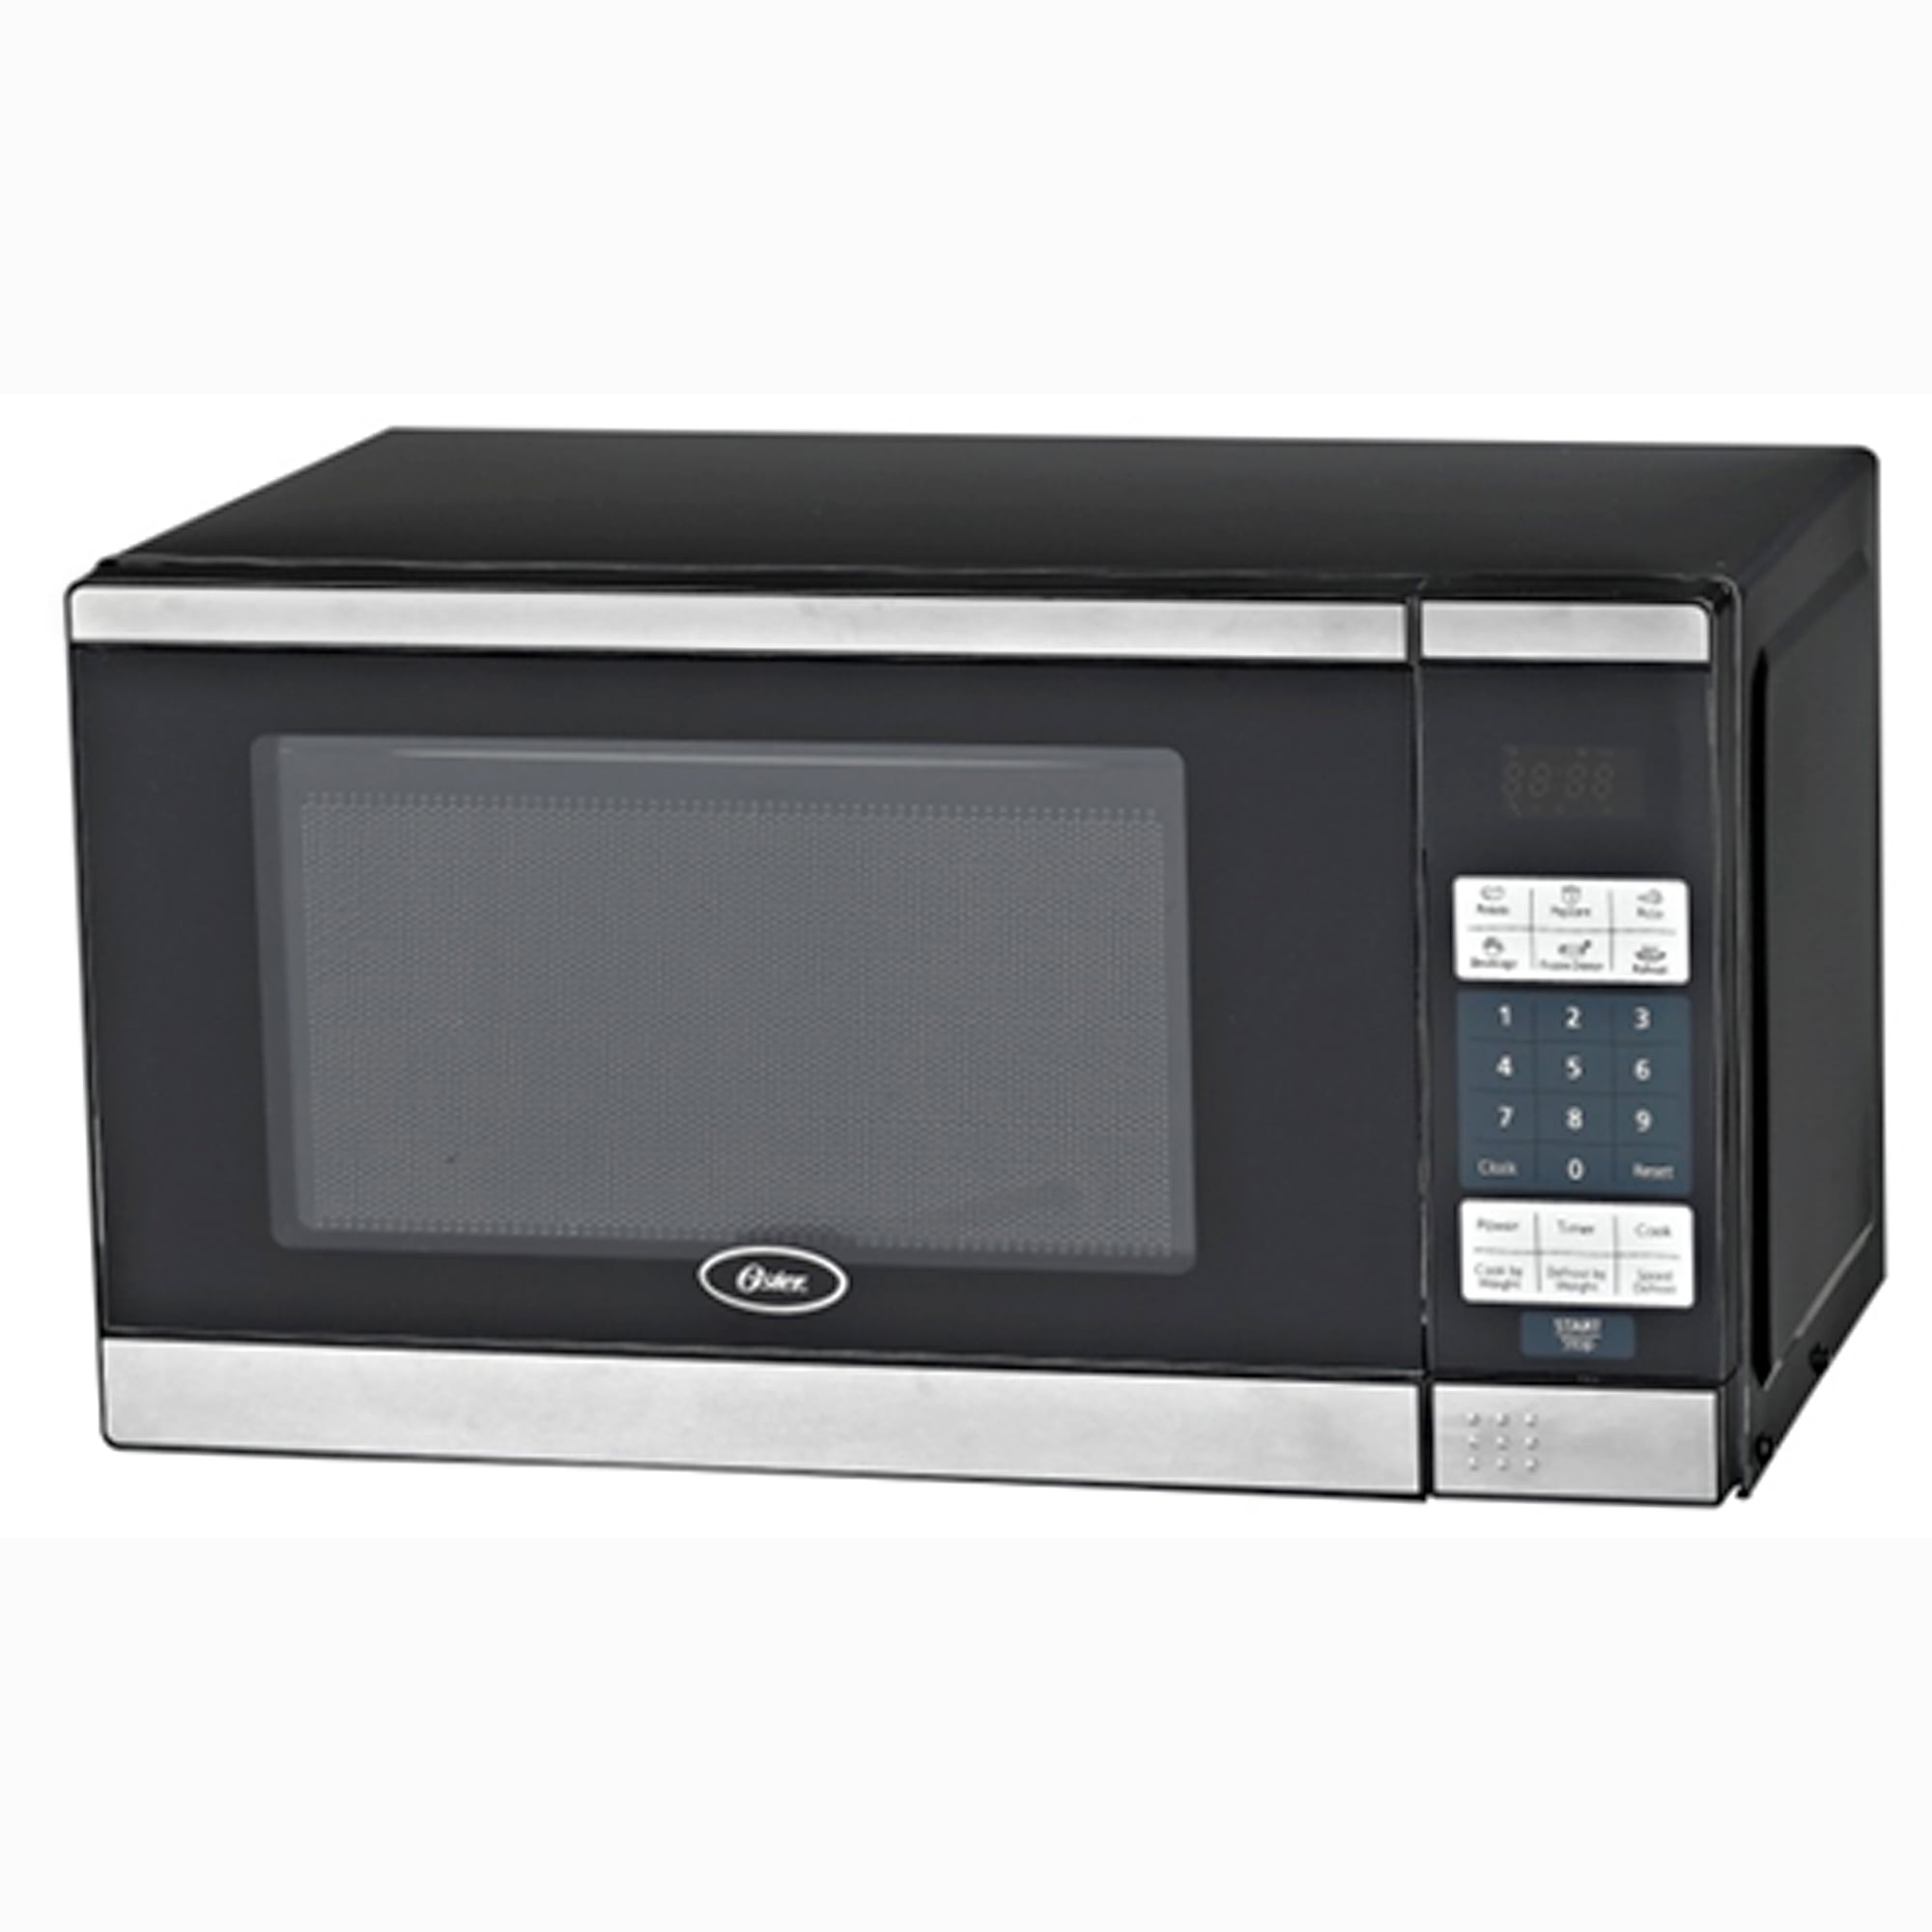 Oster 0 7 Cu Ft Microwave Oven, 0 7 Cu Ft Countertop Microwave In Stainless Steel